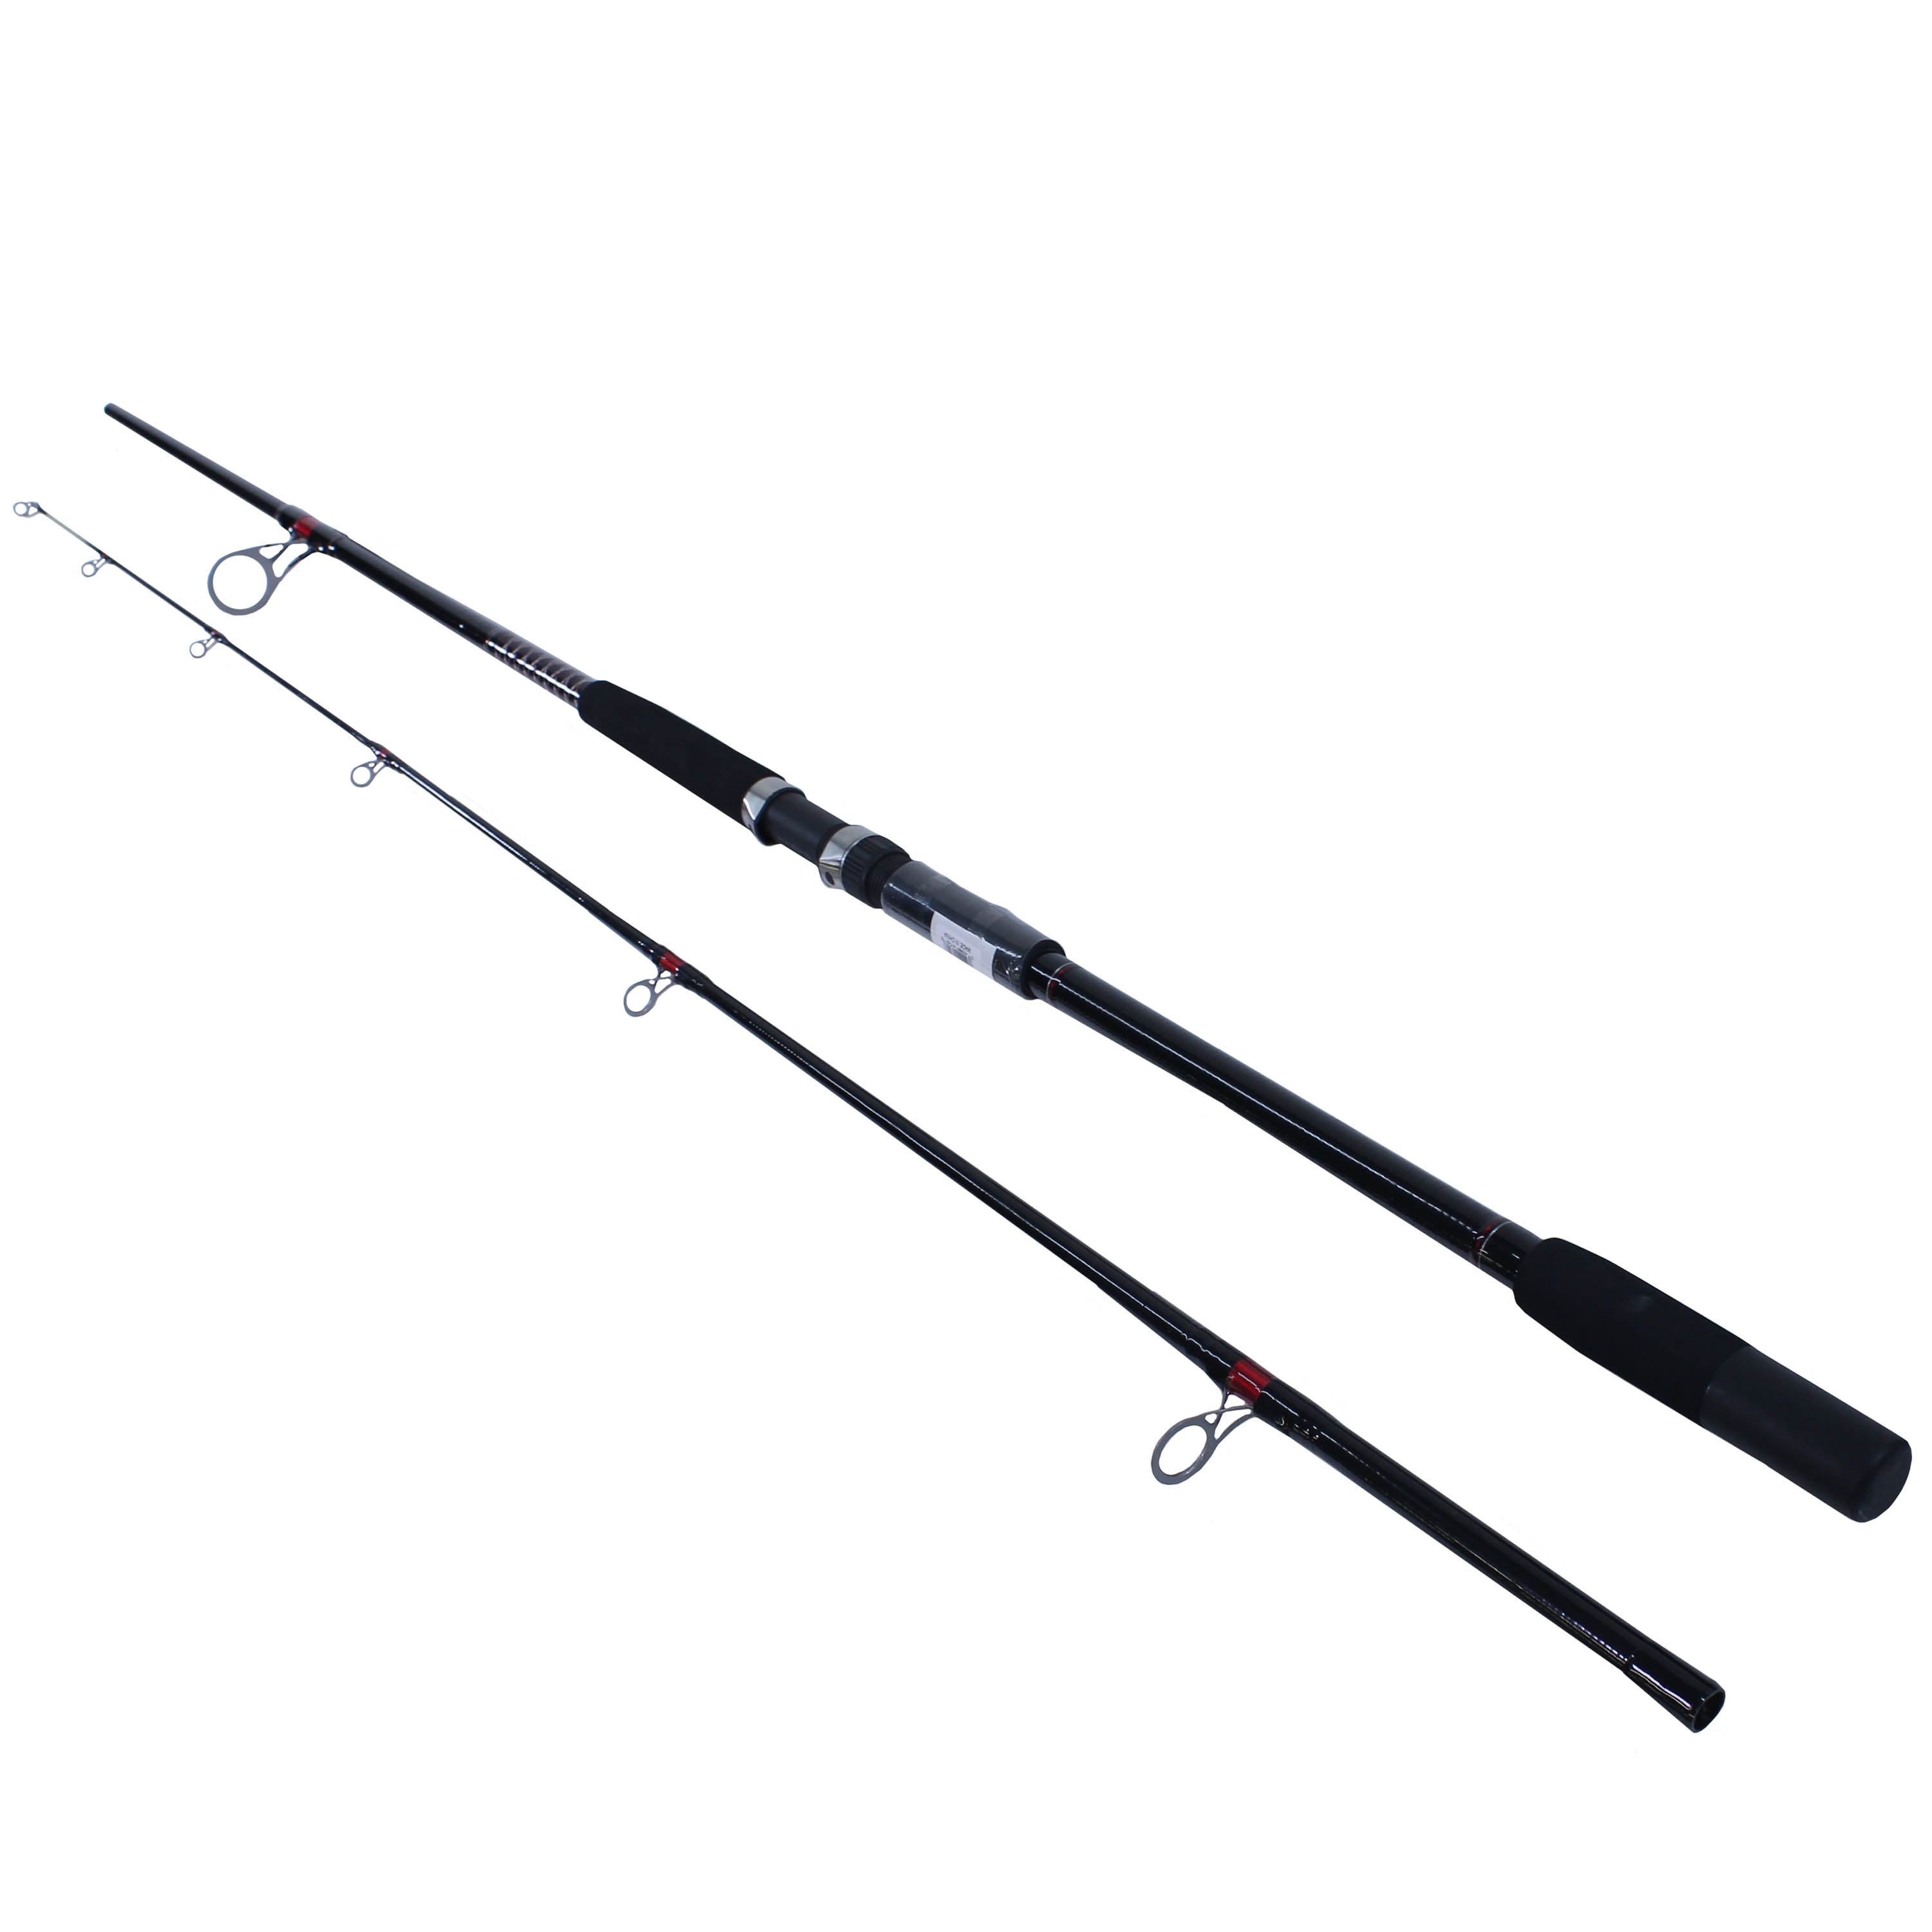 2-section 12' Catfish Rod 20-40 LB Line Weight/ Spinning/ Sale for 39.99 New